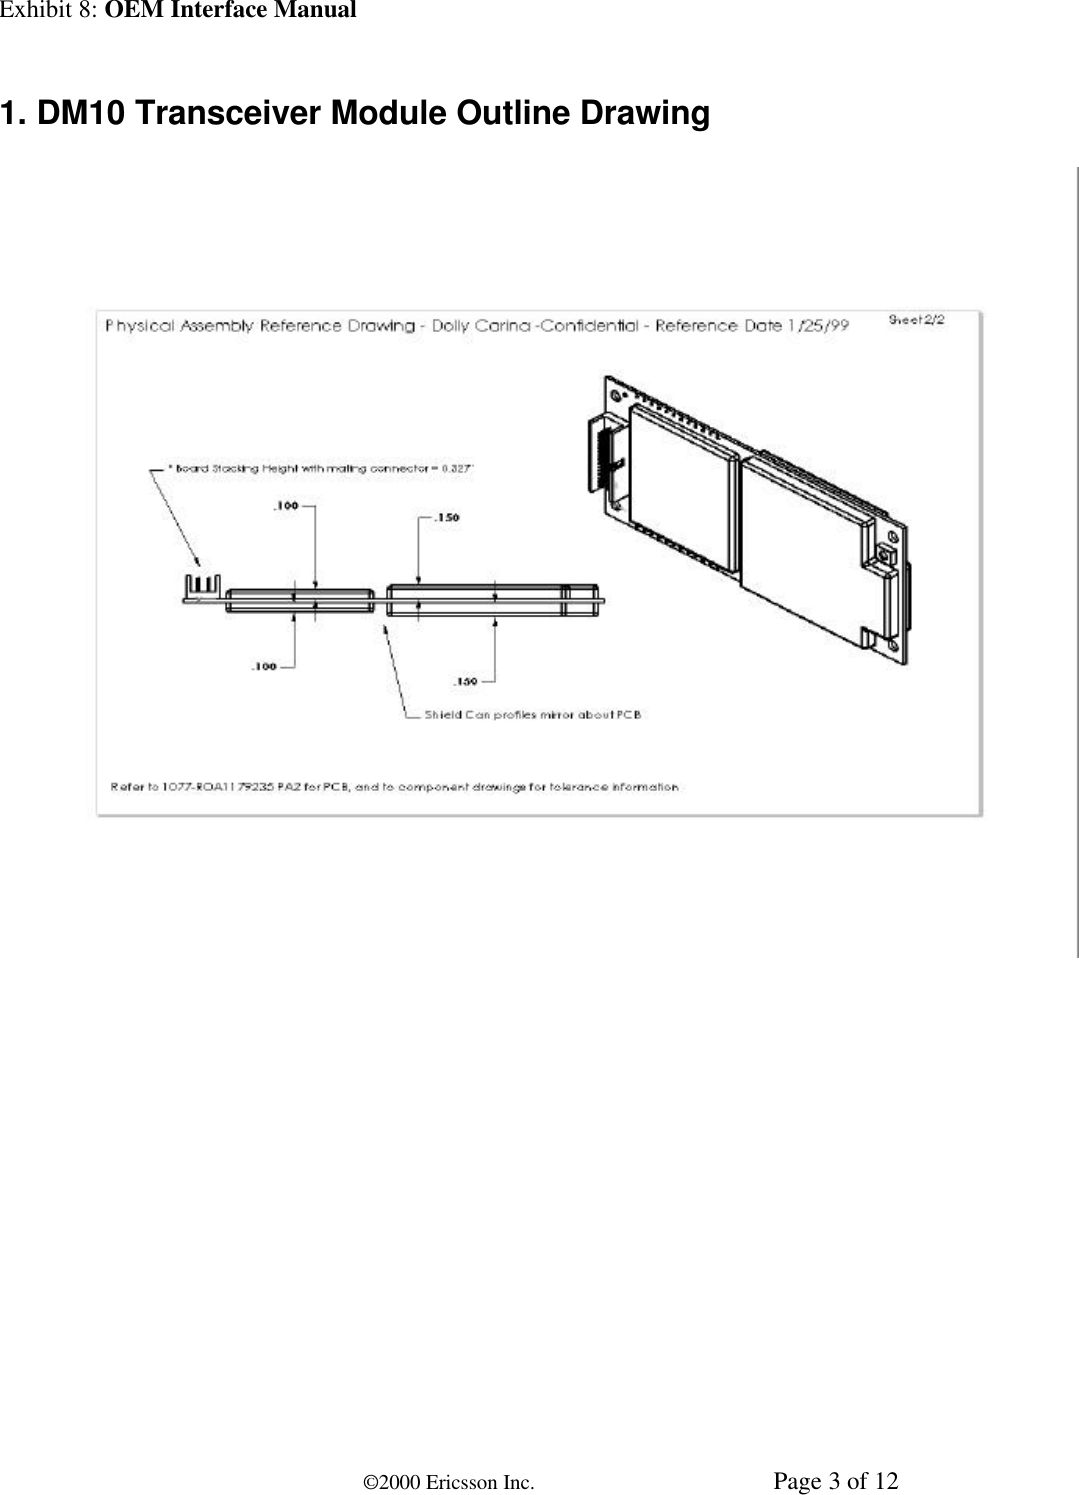 Exhibit 8: OEM Interface Manual©2000 Ericsson Inc. Page 3 of 121. DM10 Transceiver Module Outline Drawing